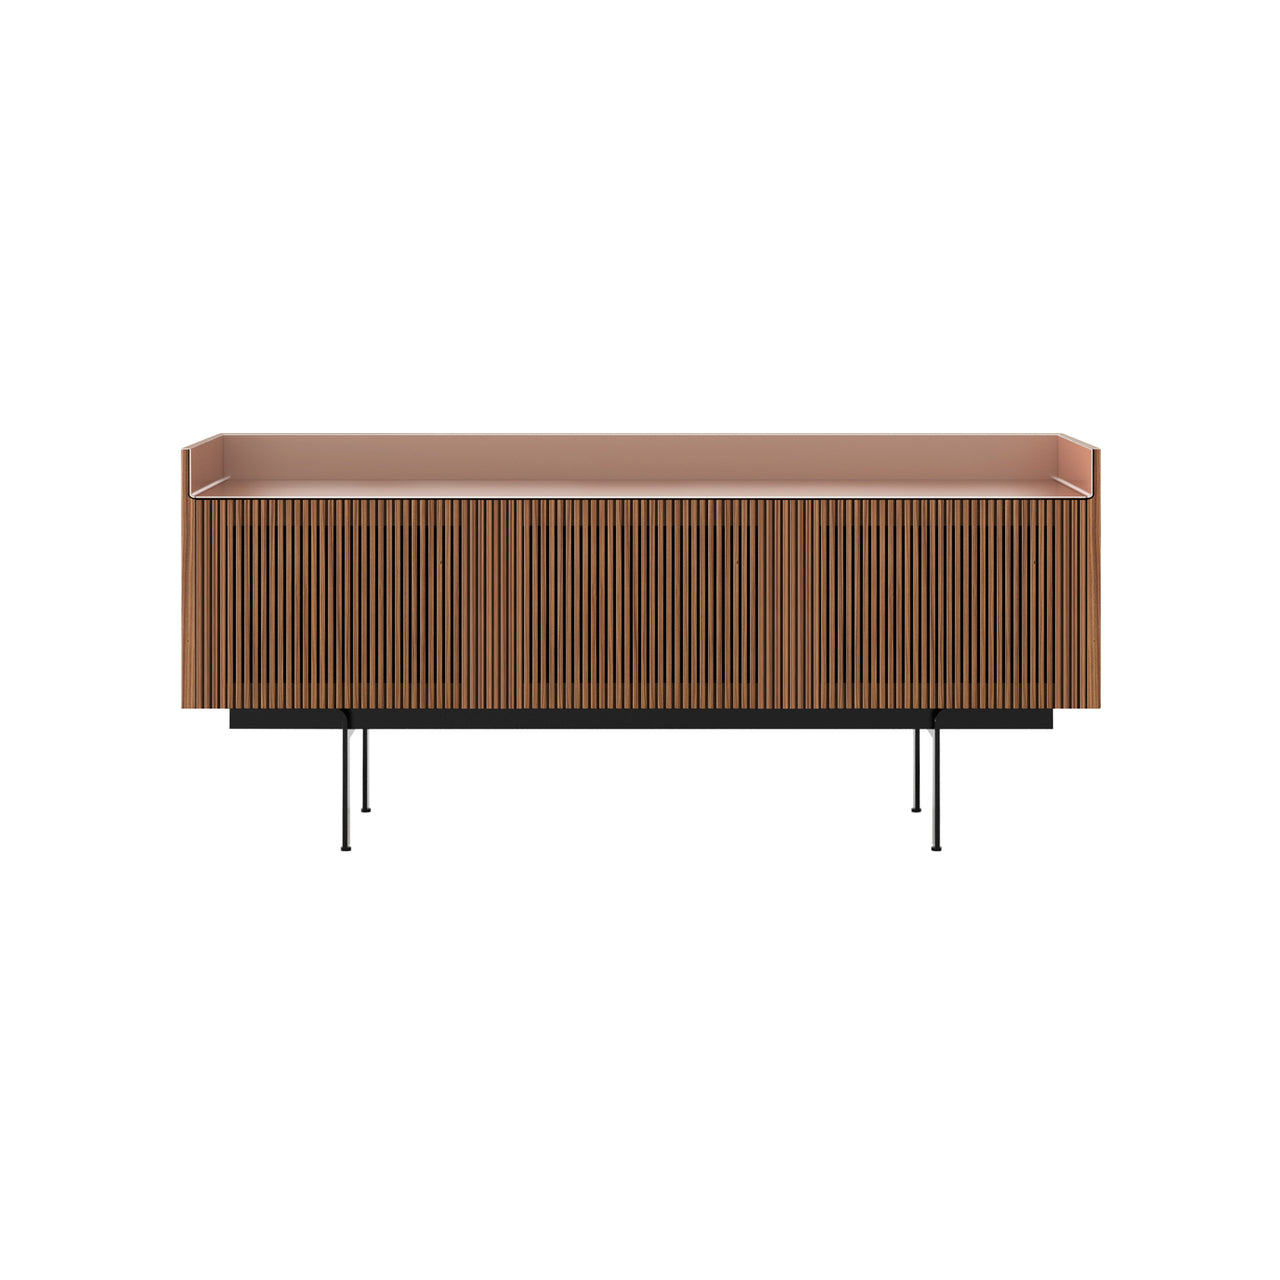 Stockholm Technic Sideboard: STH304 + Walnut Stained Walnut + Anodized Aluminum Pale Rose + Black